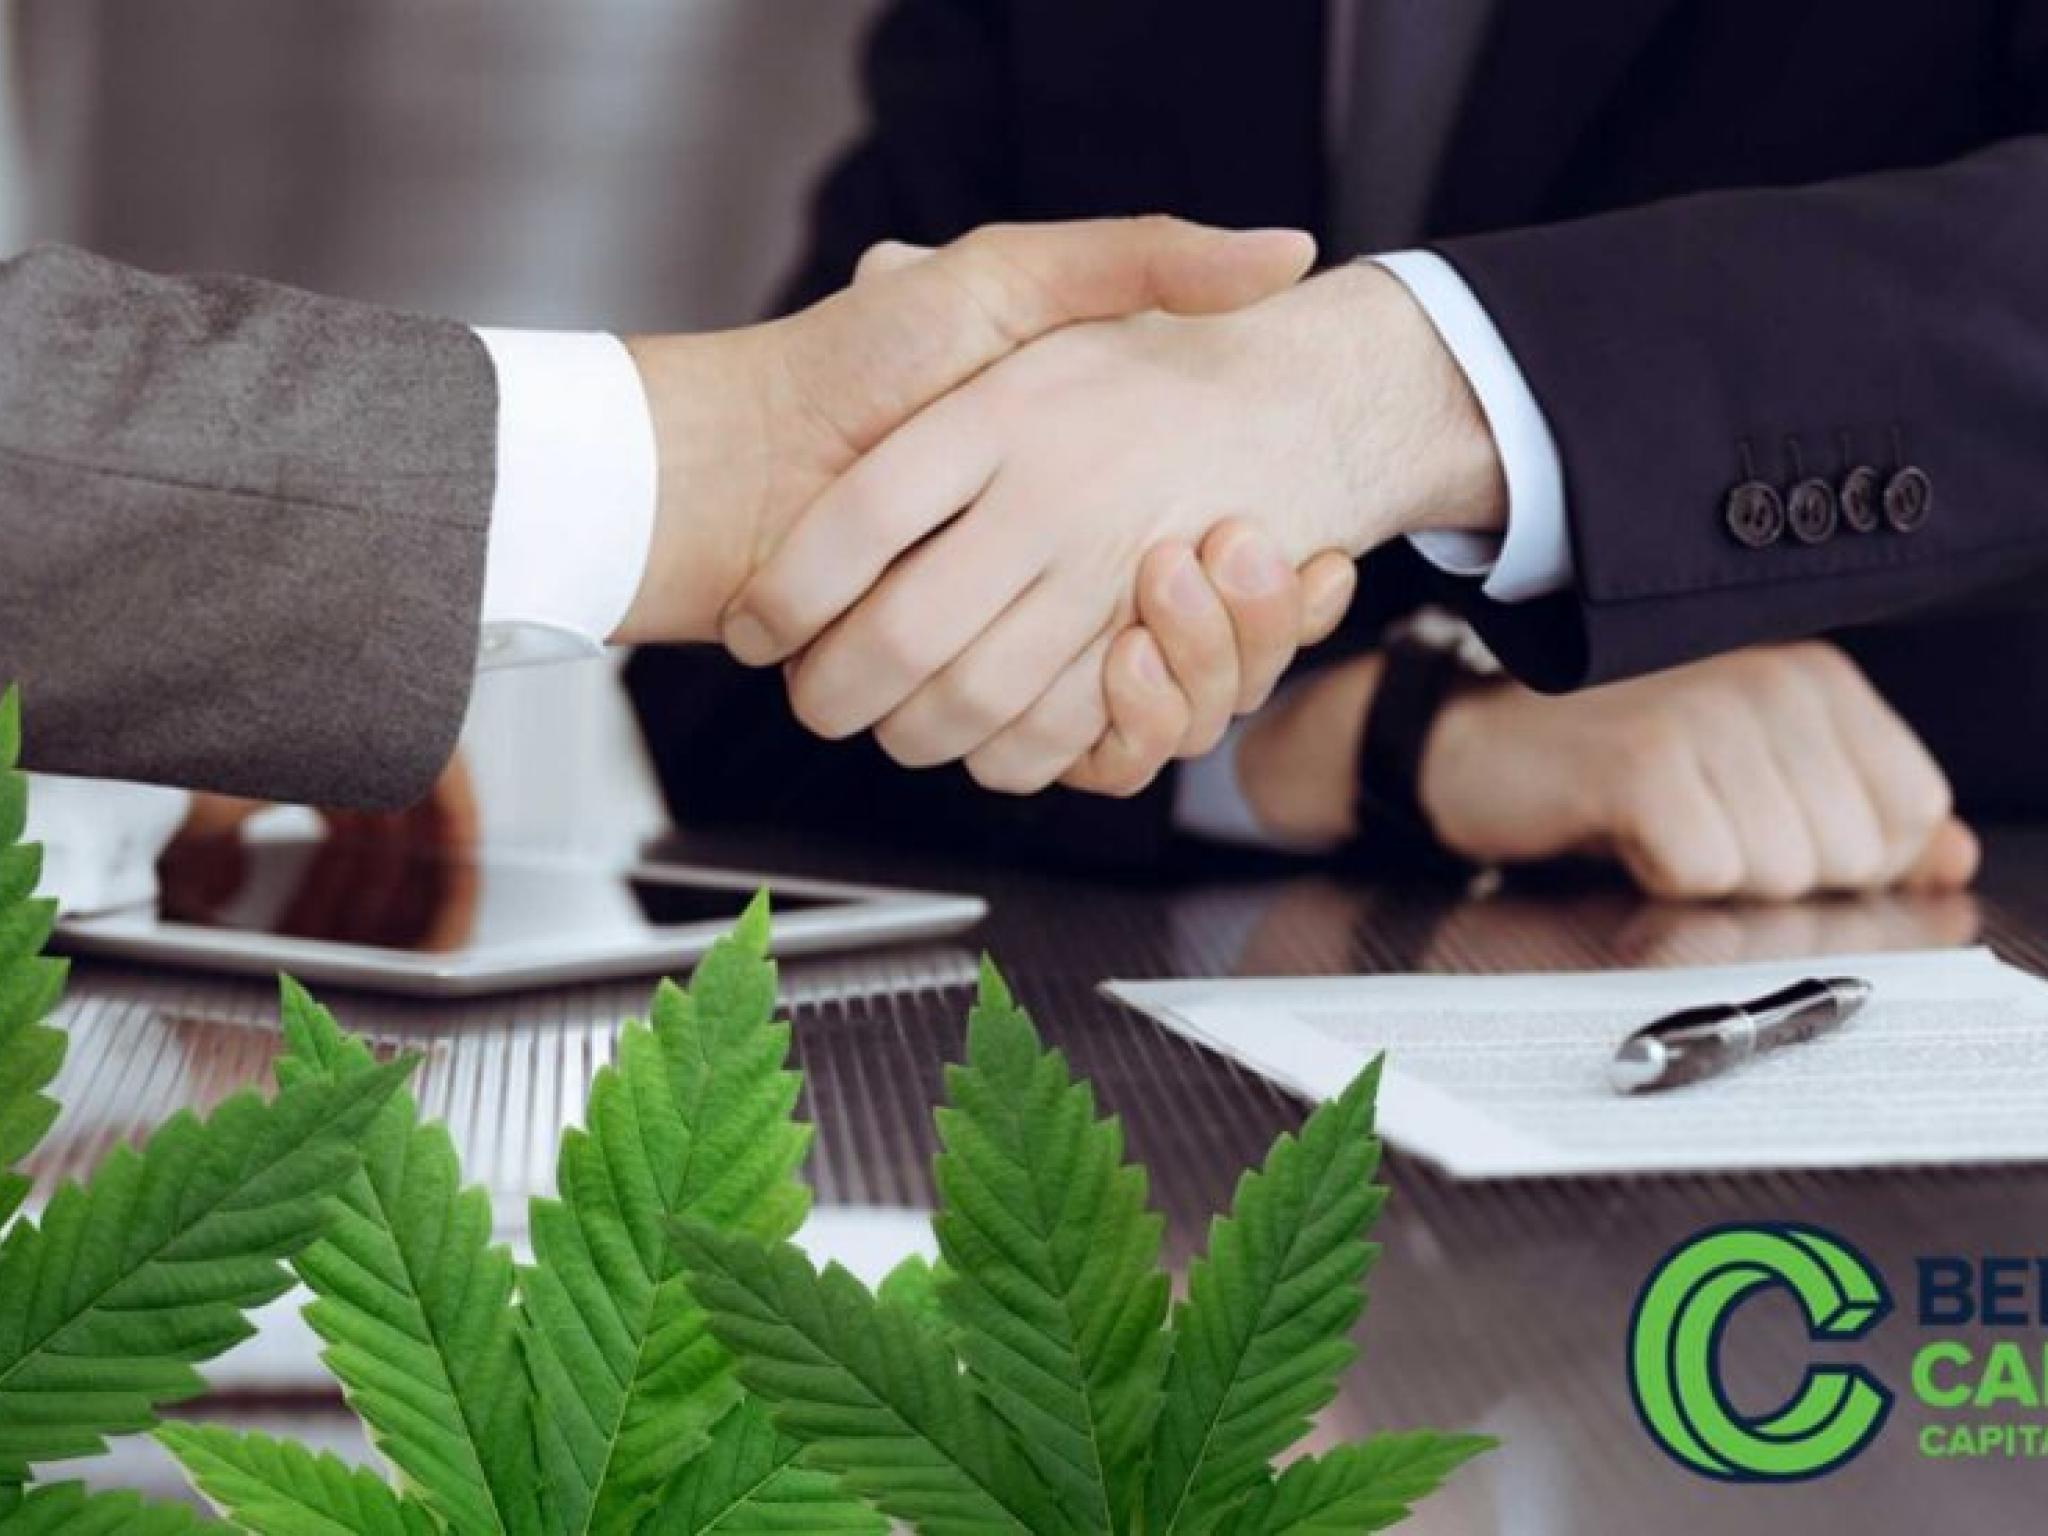  curaleaf-strengthens-presence-in-germany-via-new-cannabis-acquisition 